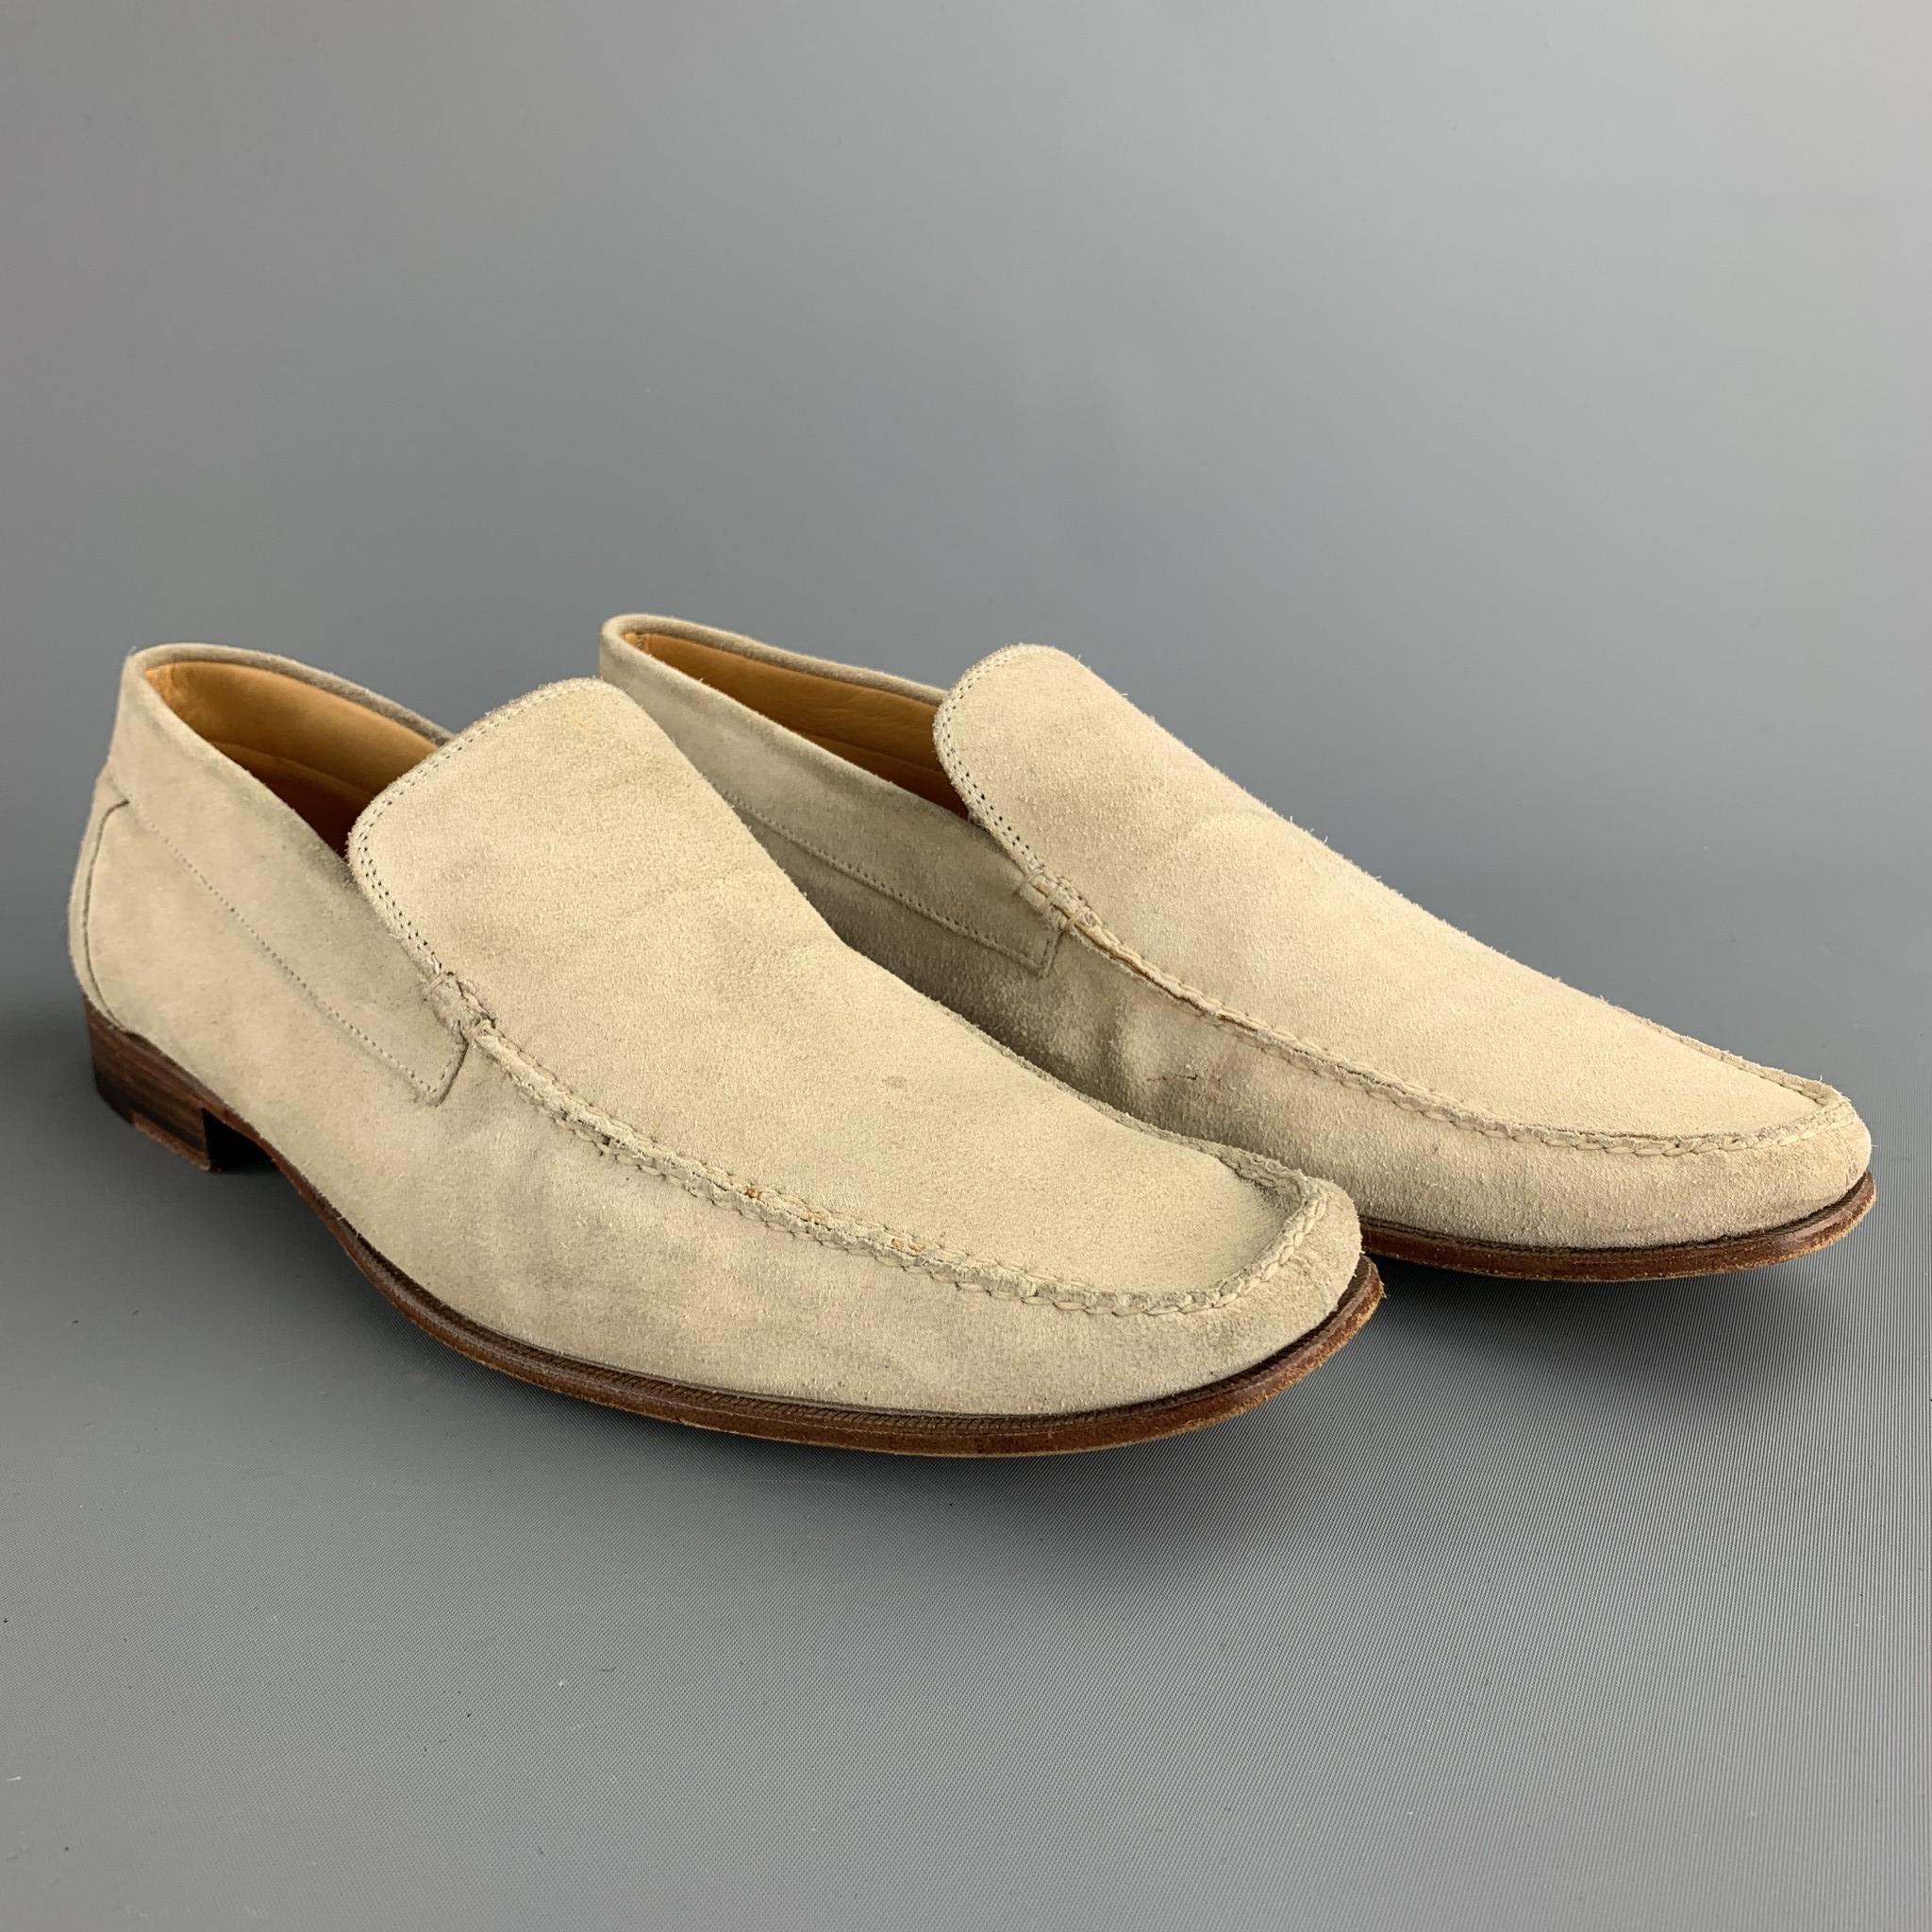 SUTOR MANTELLASSI loafers comes in a natural suede featuring a square toe and a wooden sole. Made in Italy.

Fair Pre-Owned Condition.
Marked: 11

Outsole:

12 in. x 3.5 in. 